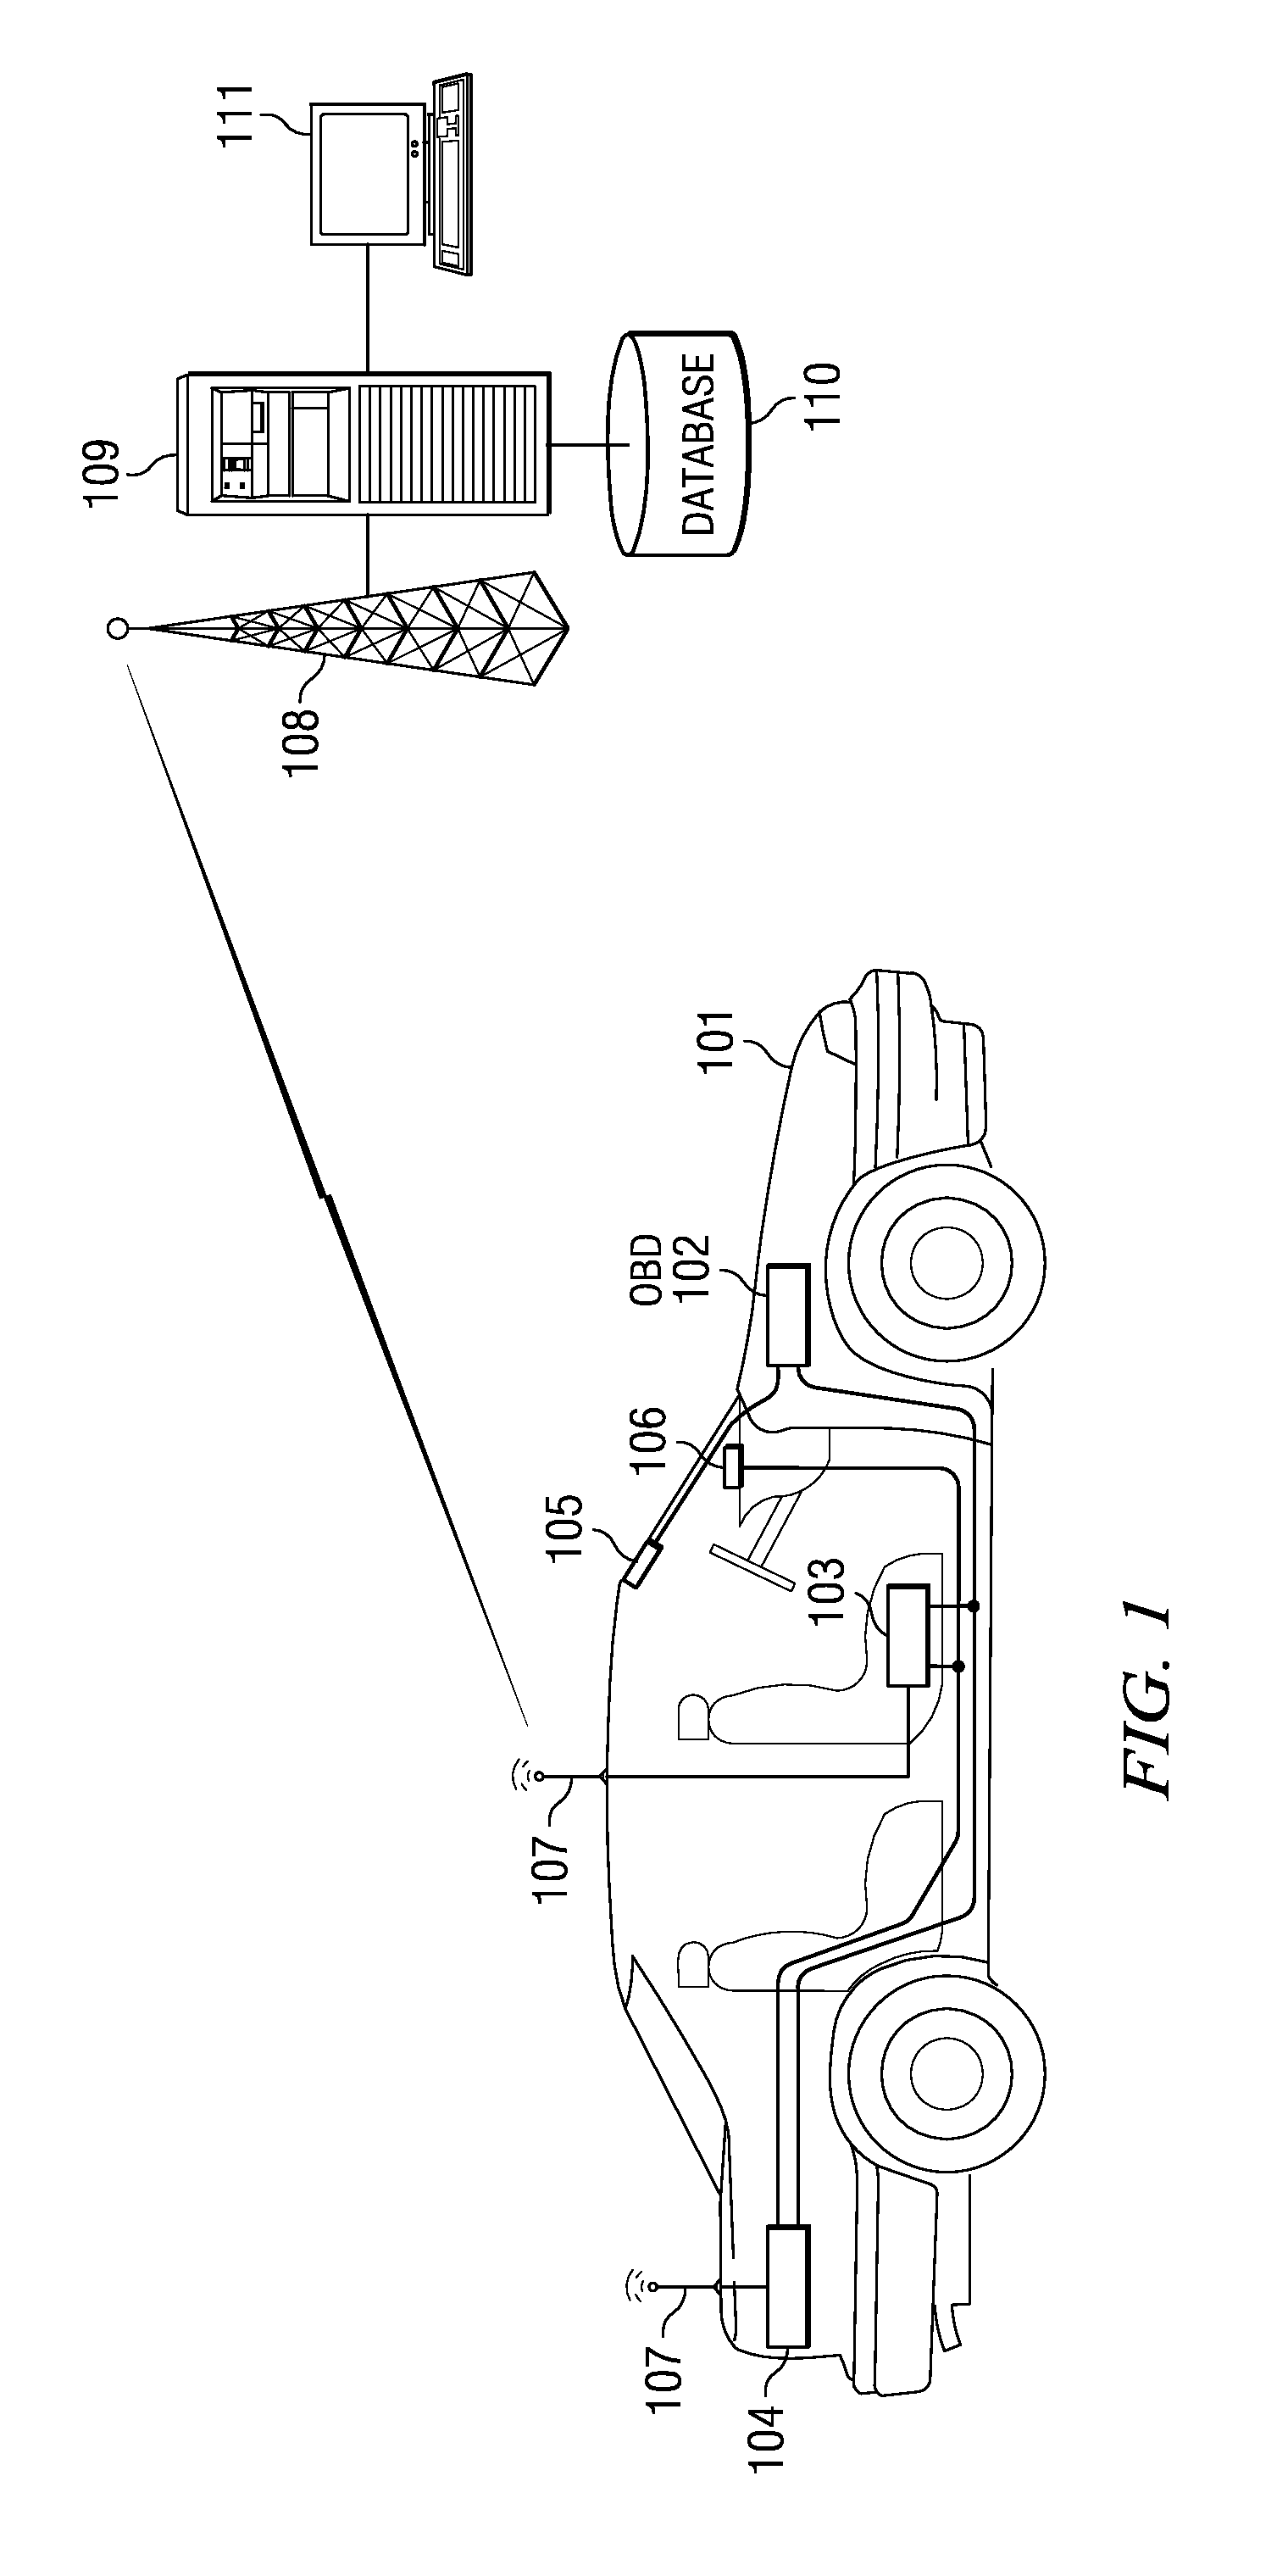 System and Method for Monitoring and Improving Driver Behavior